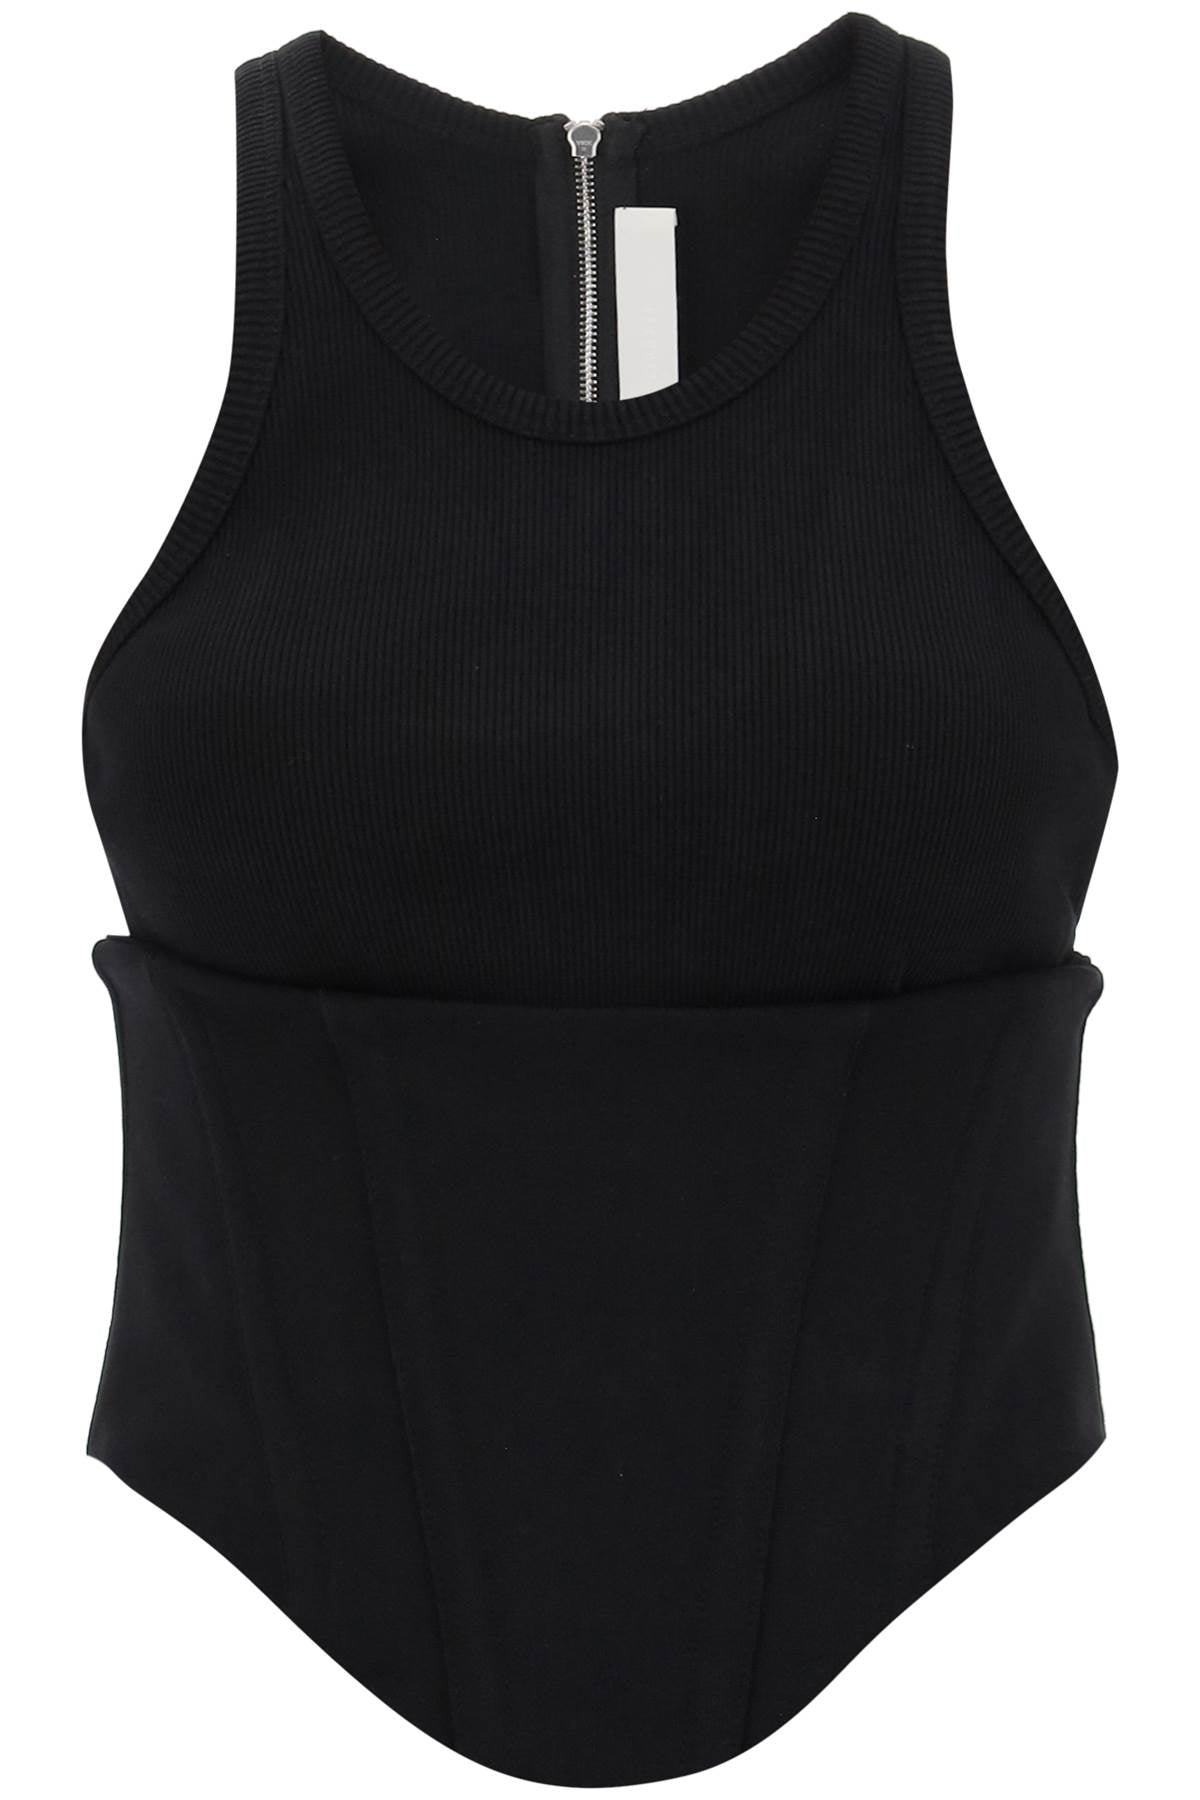 Dion lee tank top with underbust corset-0